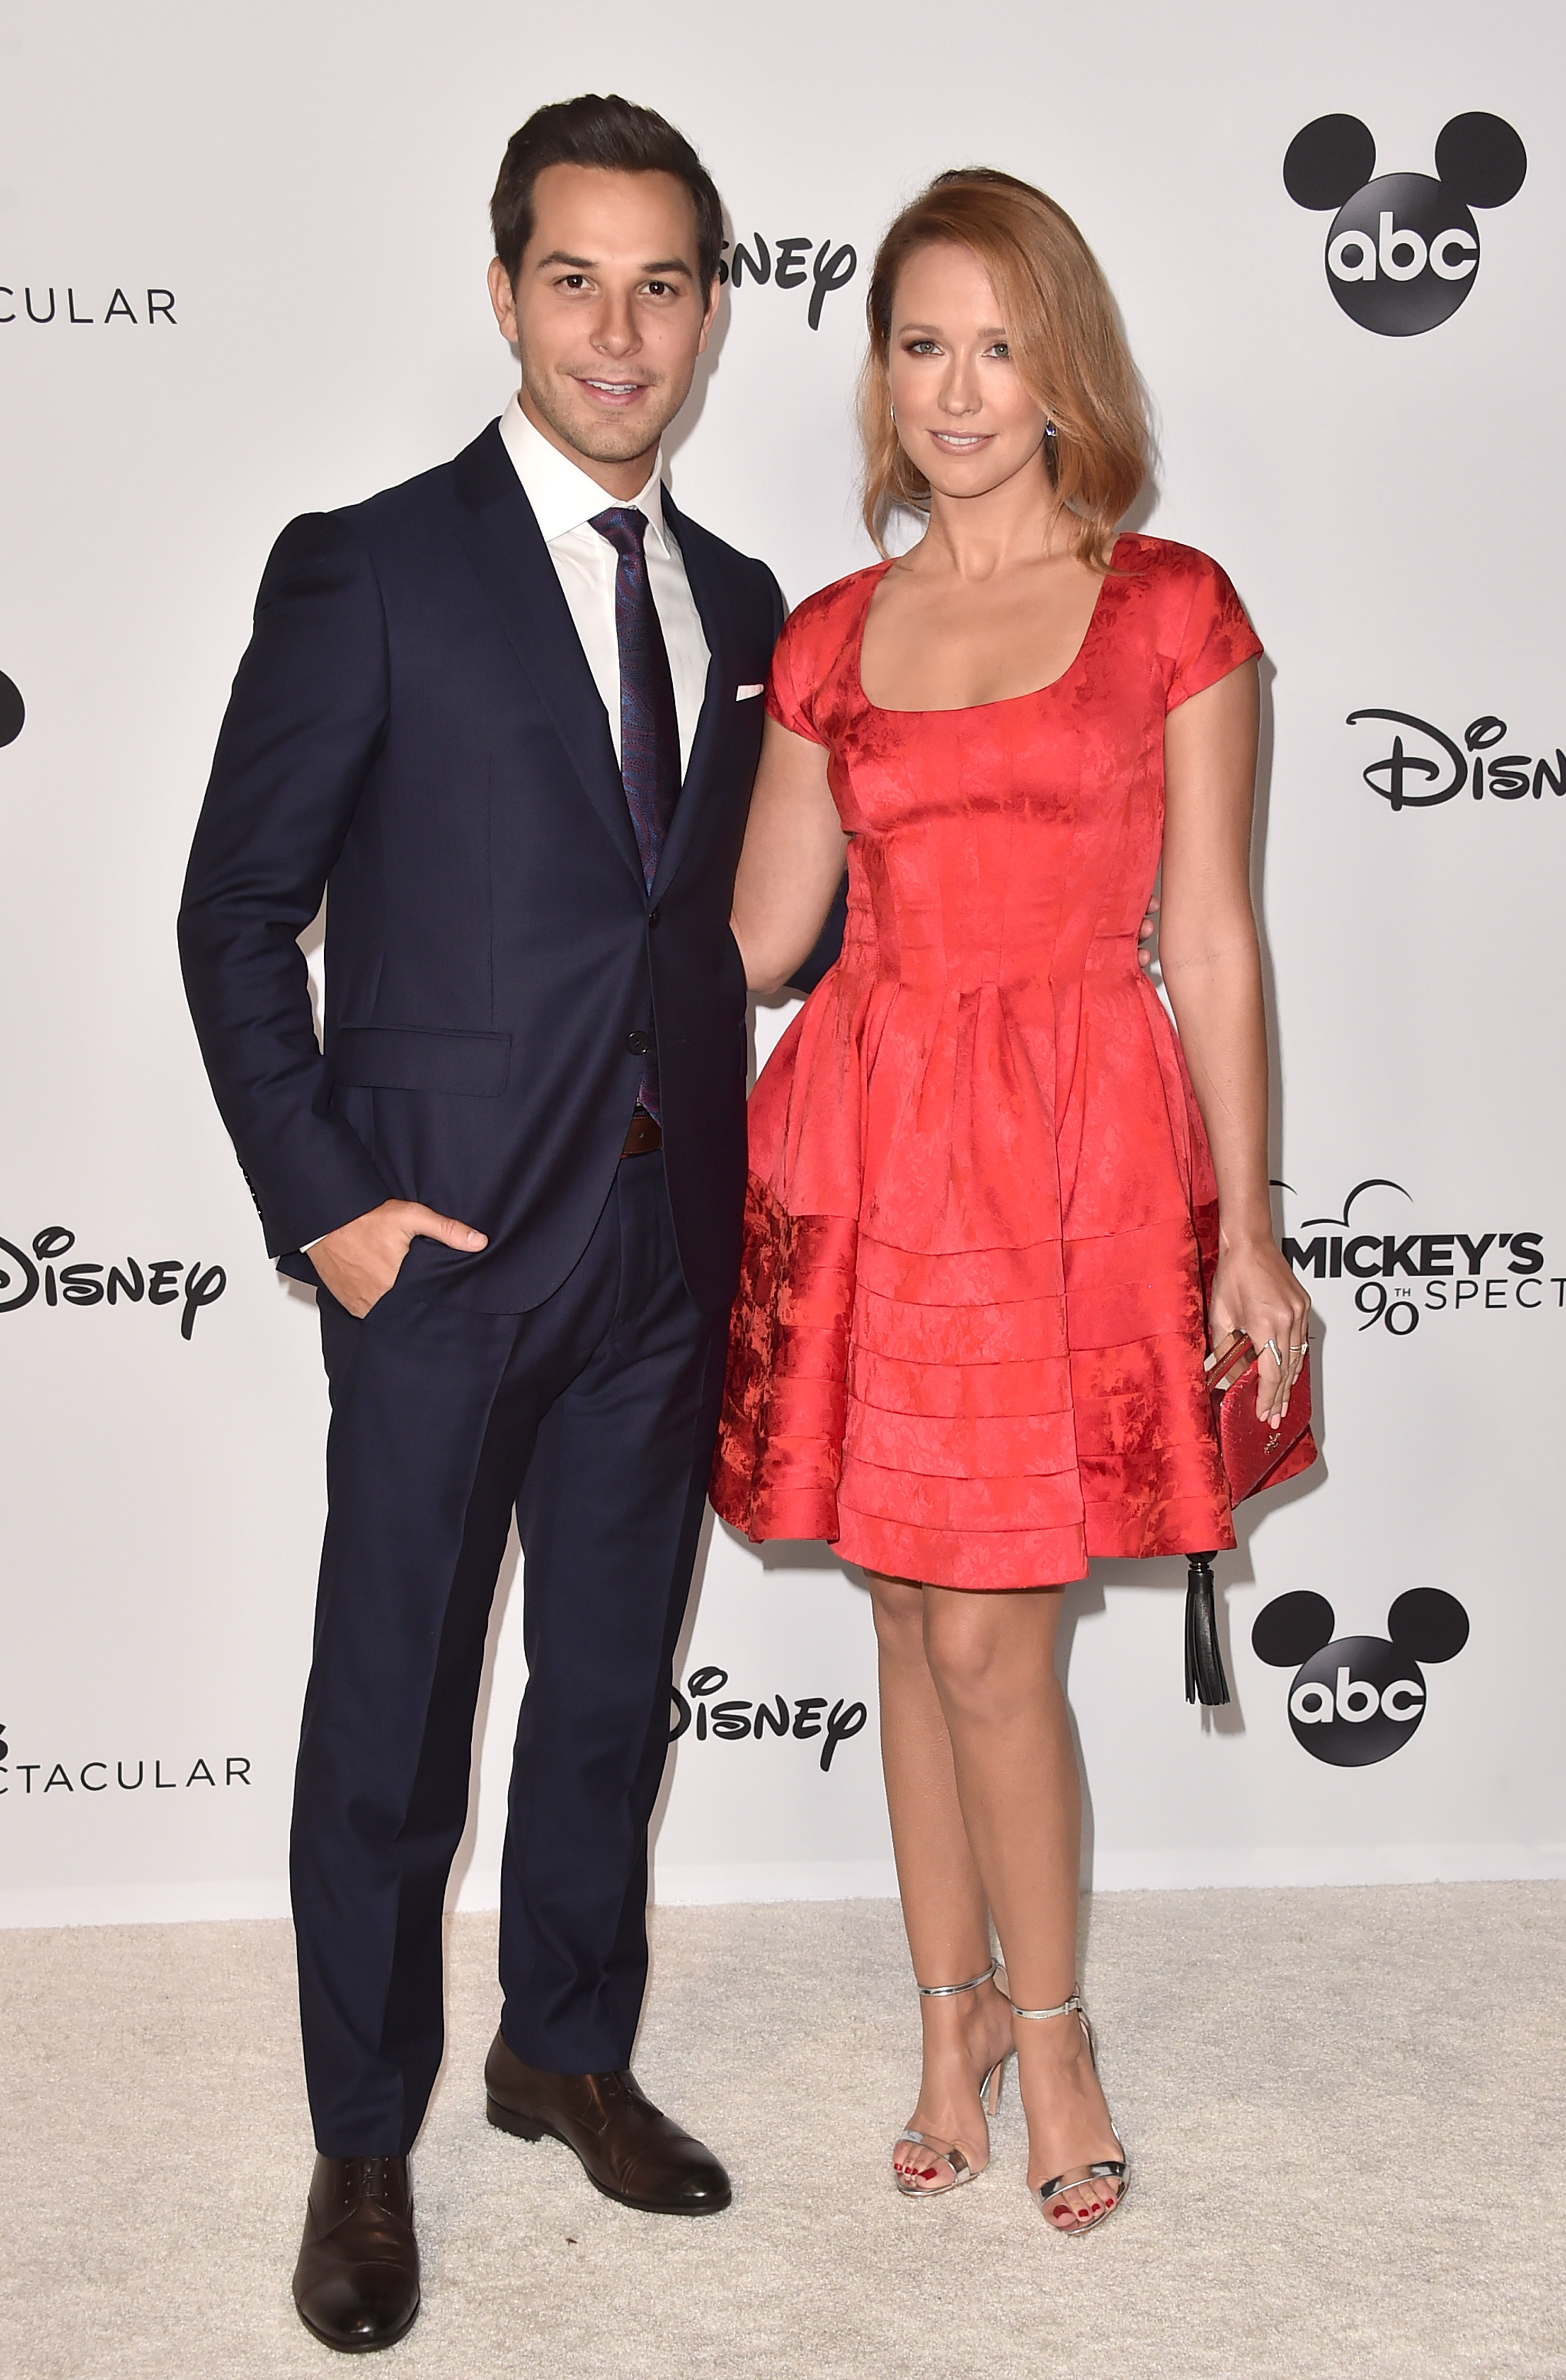 Skylar Astin and Anna Camp attend Mickey's 90th Spectacular at The Shrine Auditorium on October 6, 2018, in Los Angeles, California. | Source: Getty Images